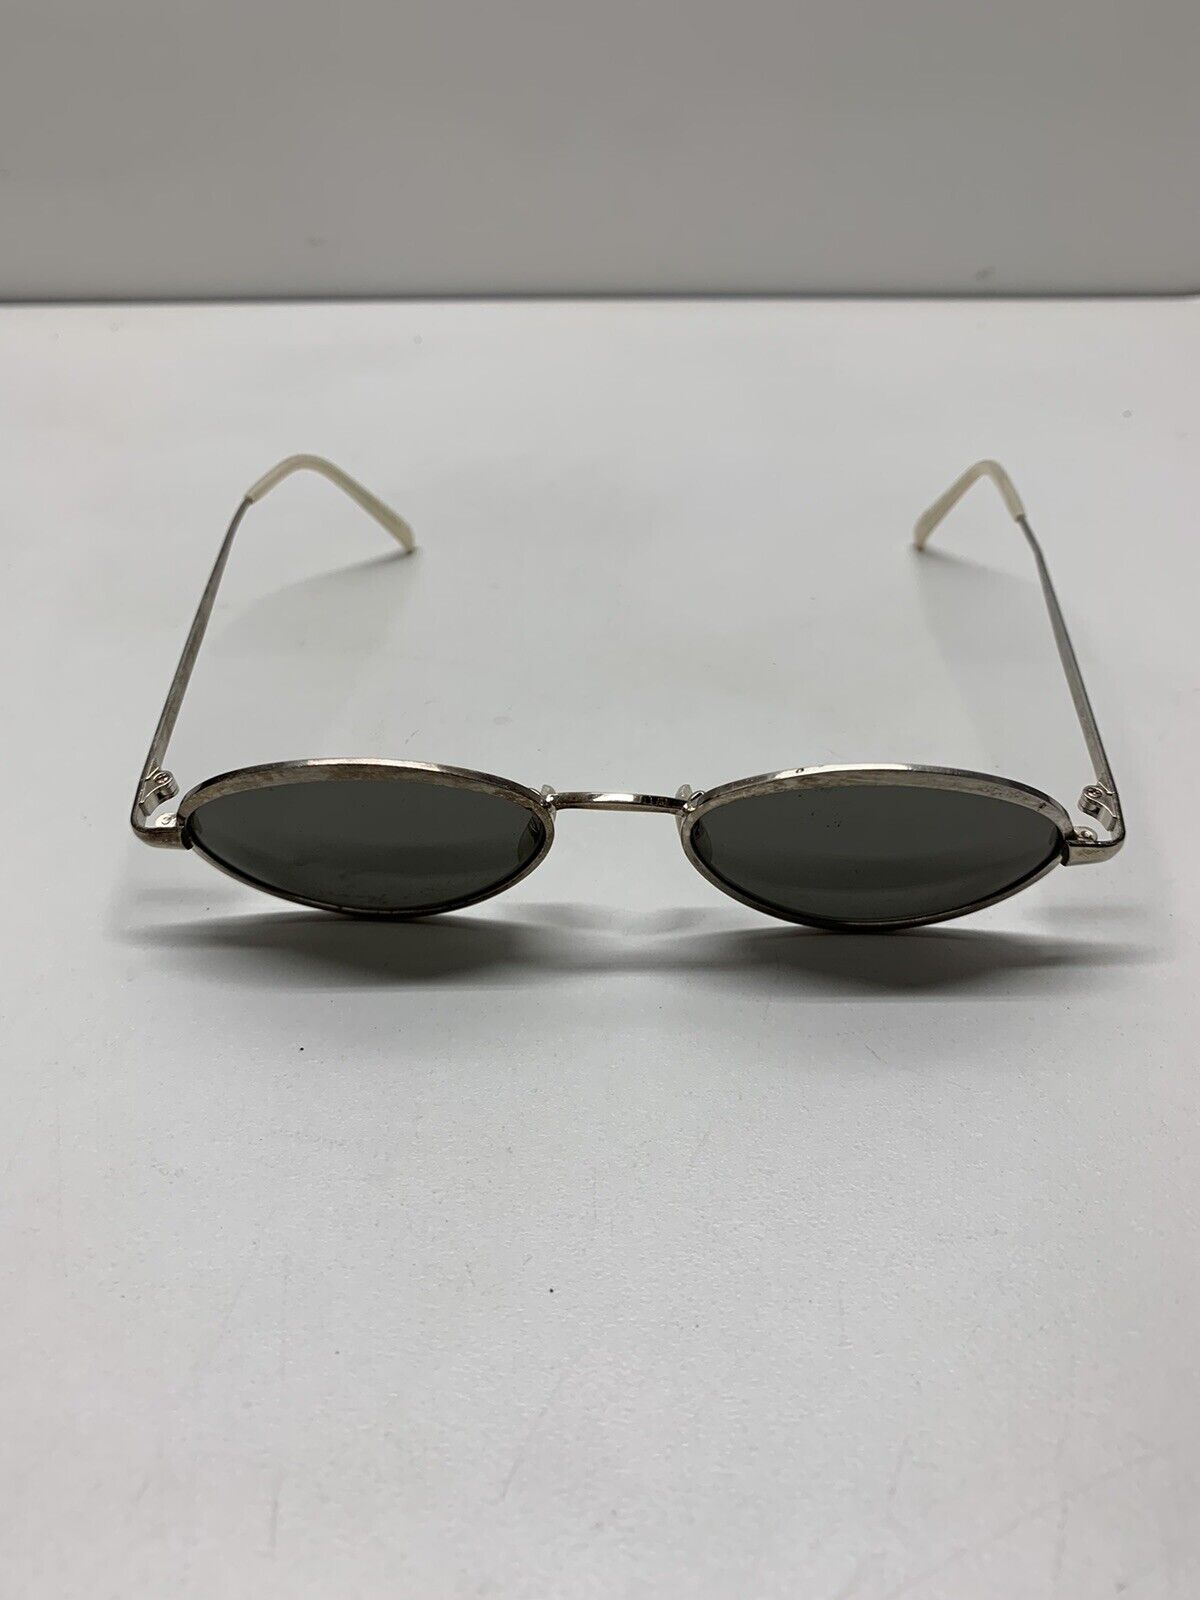 Oliver Peoples Sunglasses OP-545 Silver Tone